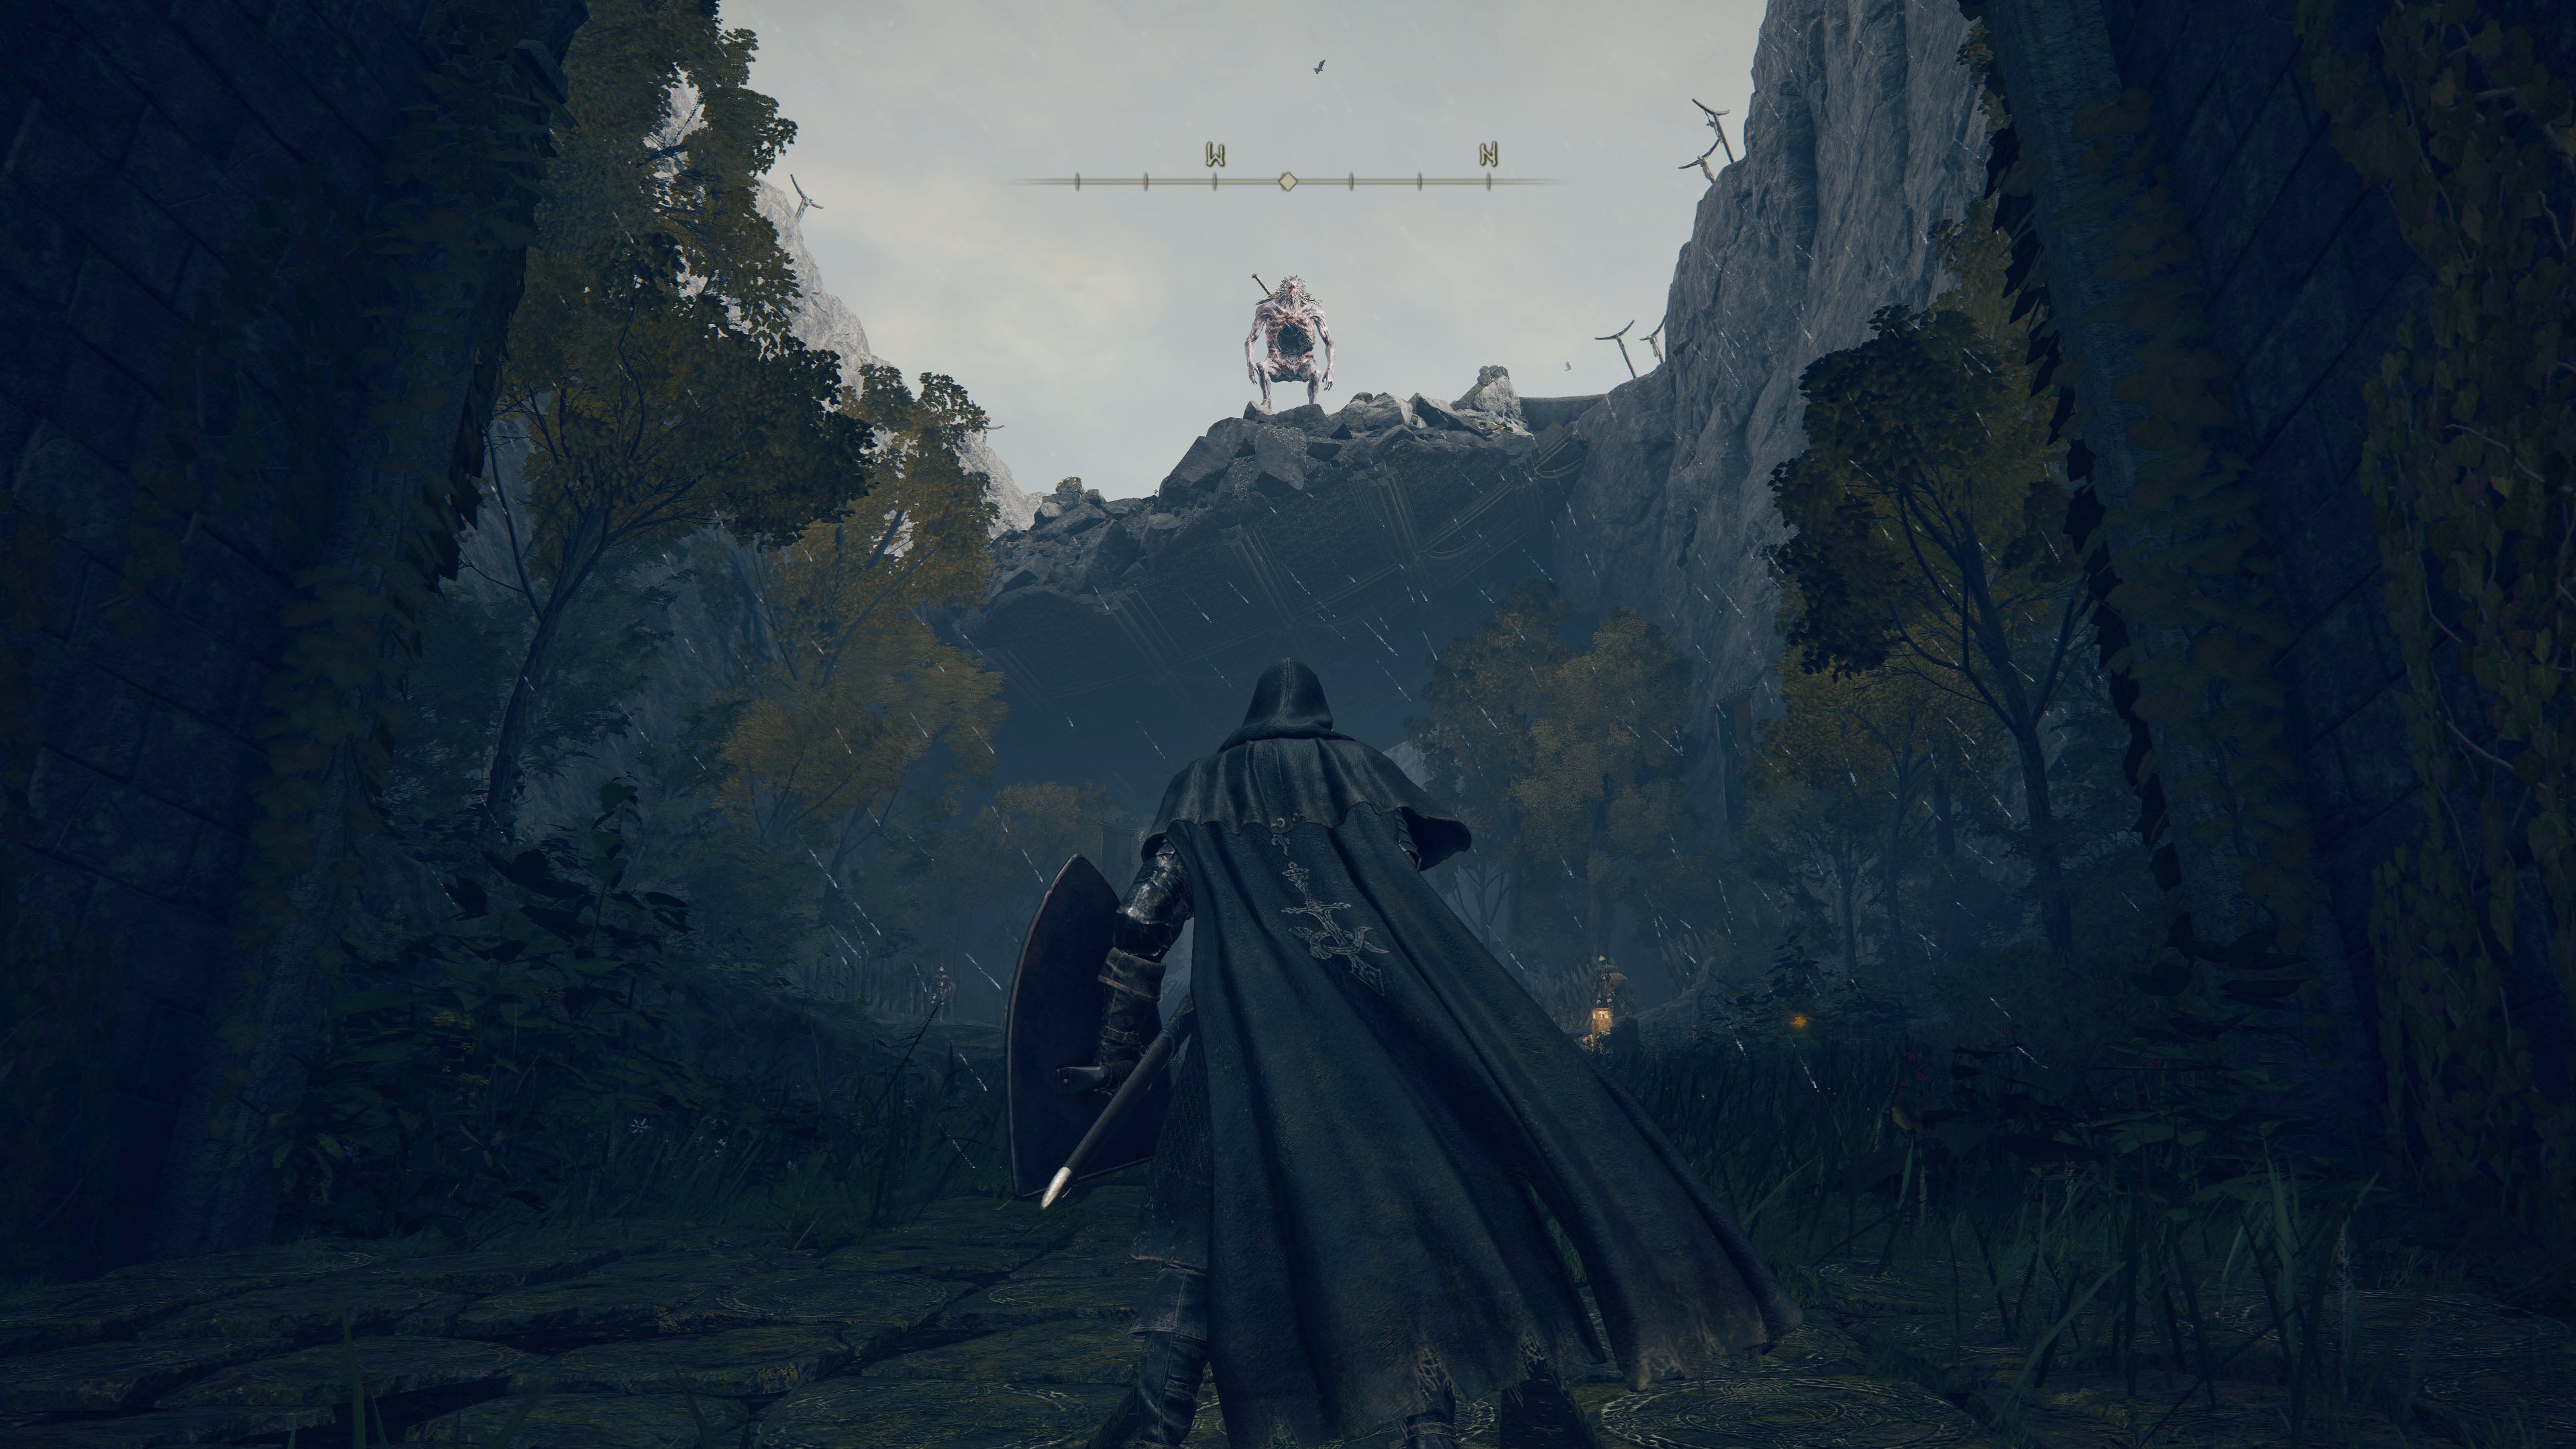 A cloaked warrior looks up at a large monster on top of a cliff in Elden Ring